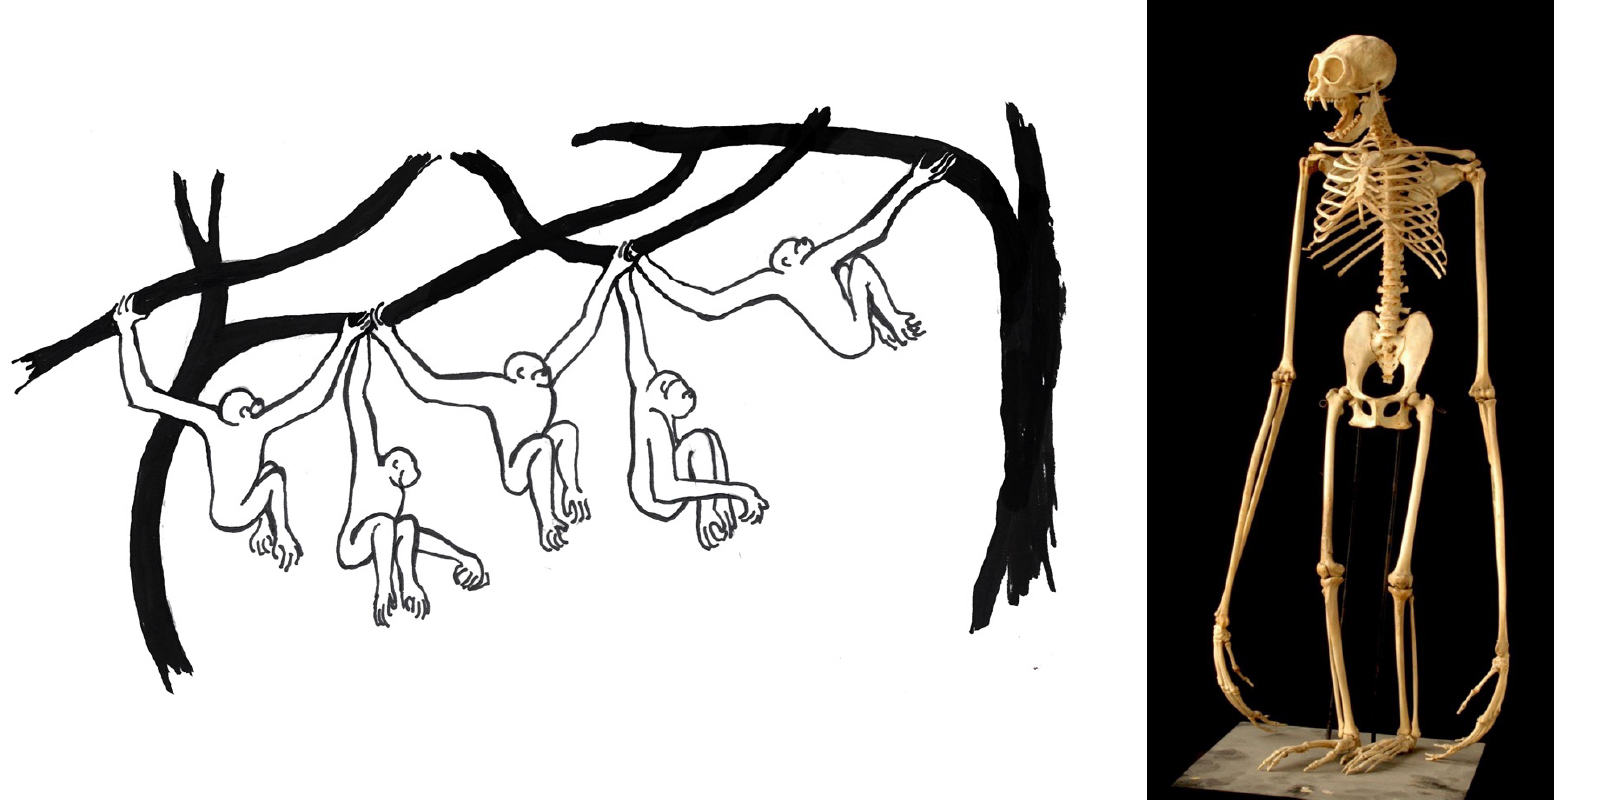 Primate swinging through branches and gibbon skeleton.